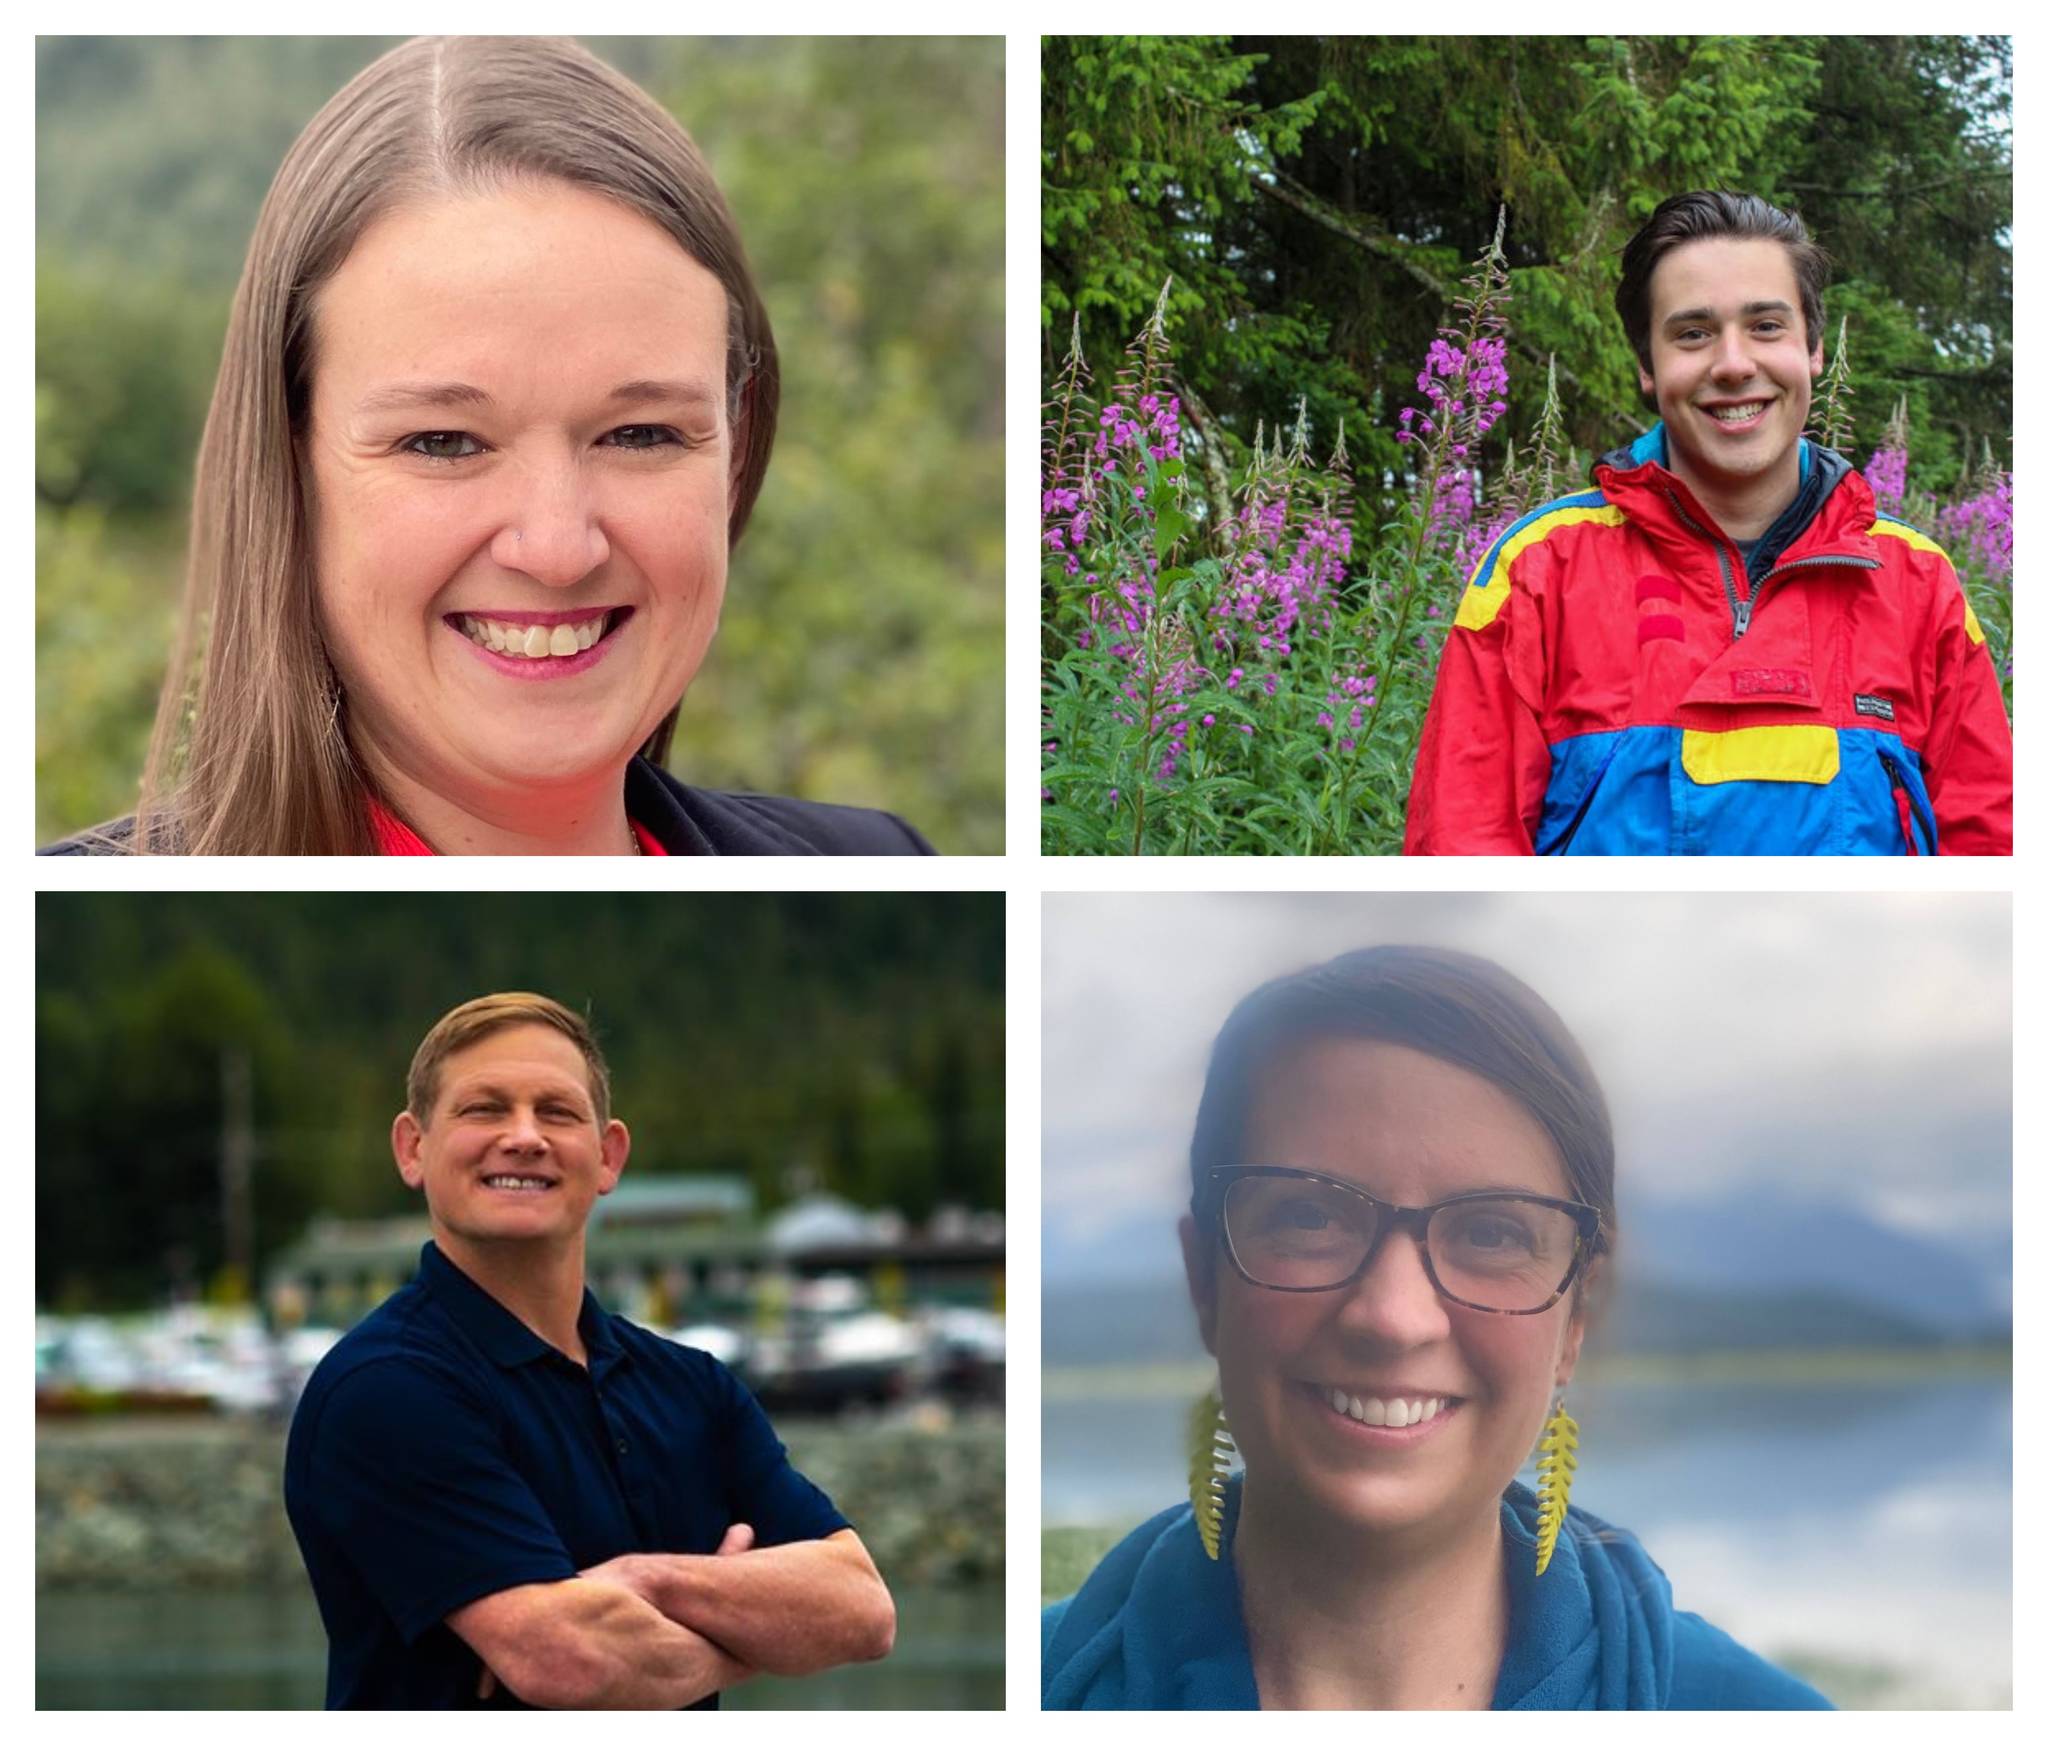 The four candidates for the City and Borough of Juneau Assembly District 2 seat covering the Mendenhall Valley, Auke Bay and north of the ferry terminal. Clockwise from top left: Lacey Derr, Derek Dzinich, Robert Shoemake and Christine Woll. (Photos courtesy of the candidates)